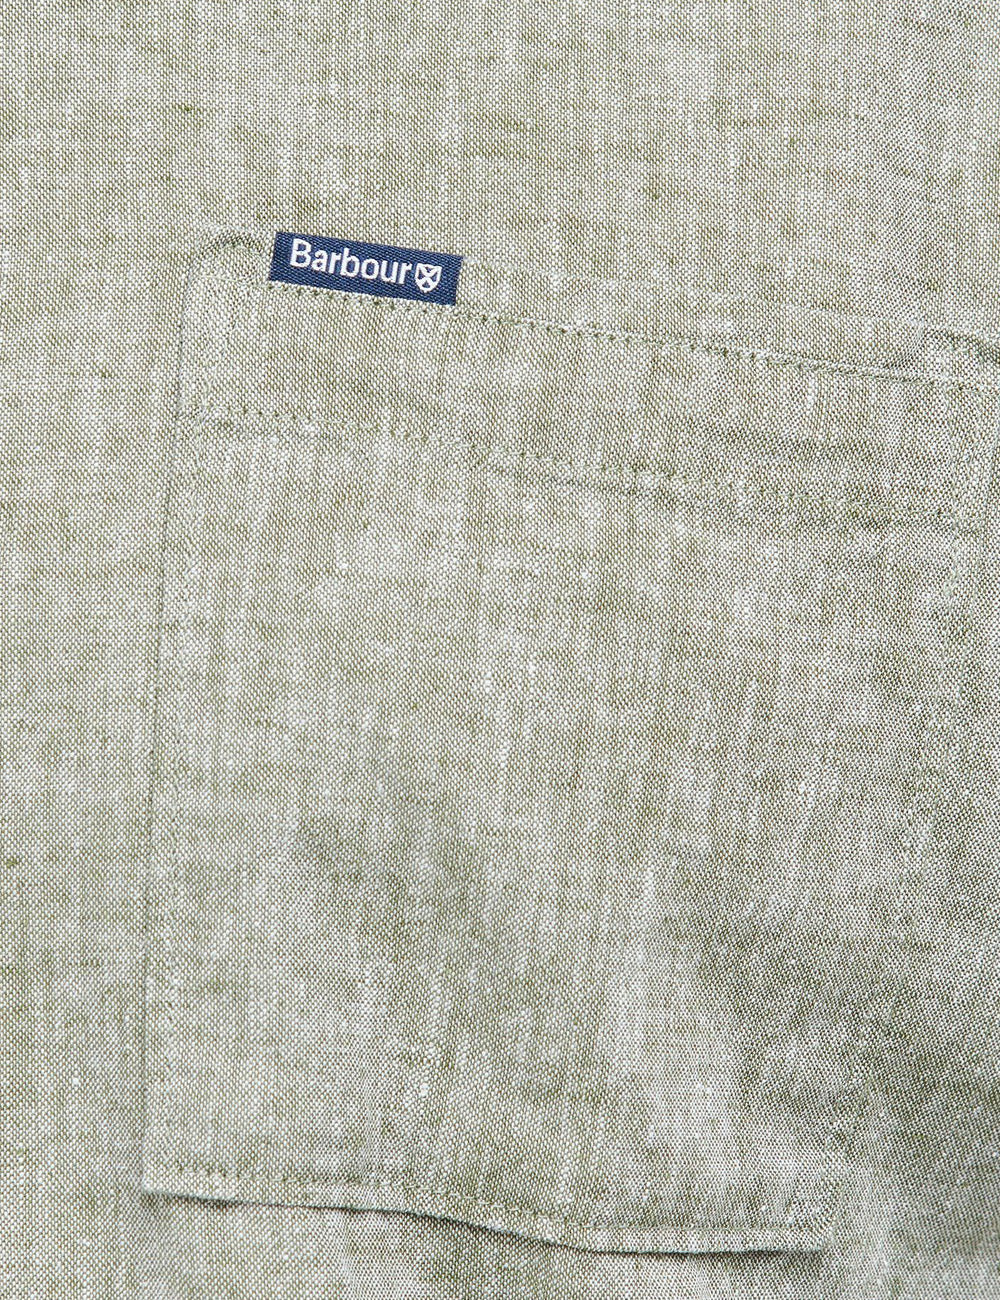 Close up of the chest patch pocket and Barbour label on the Nelson Shirt